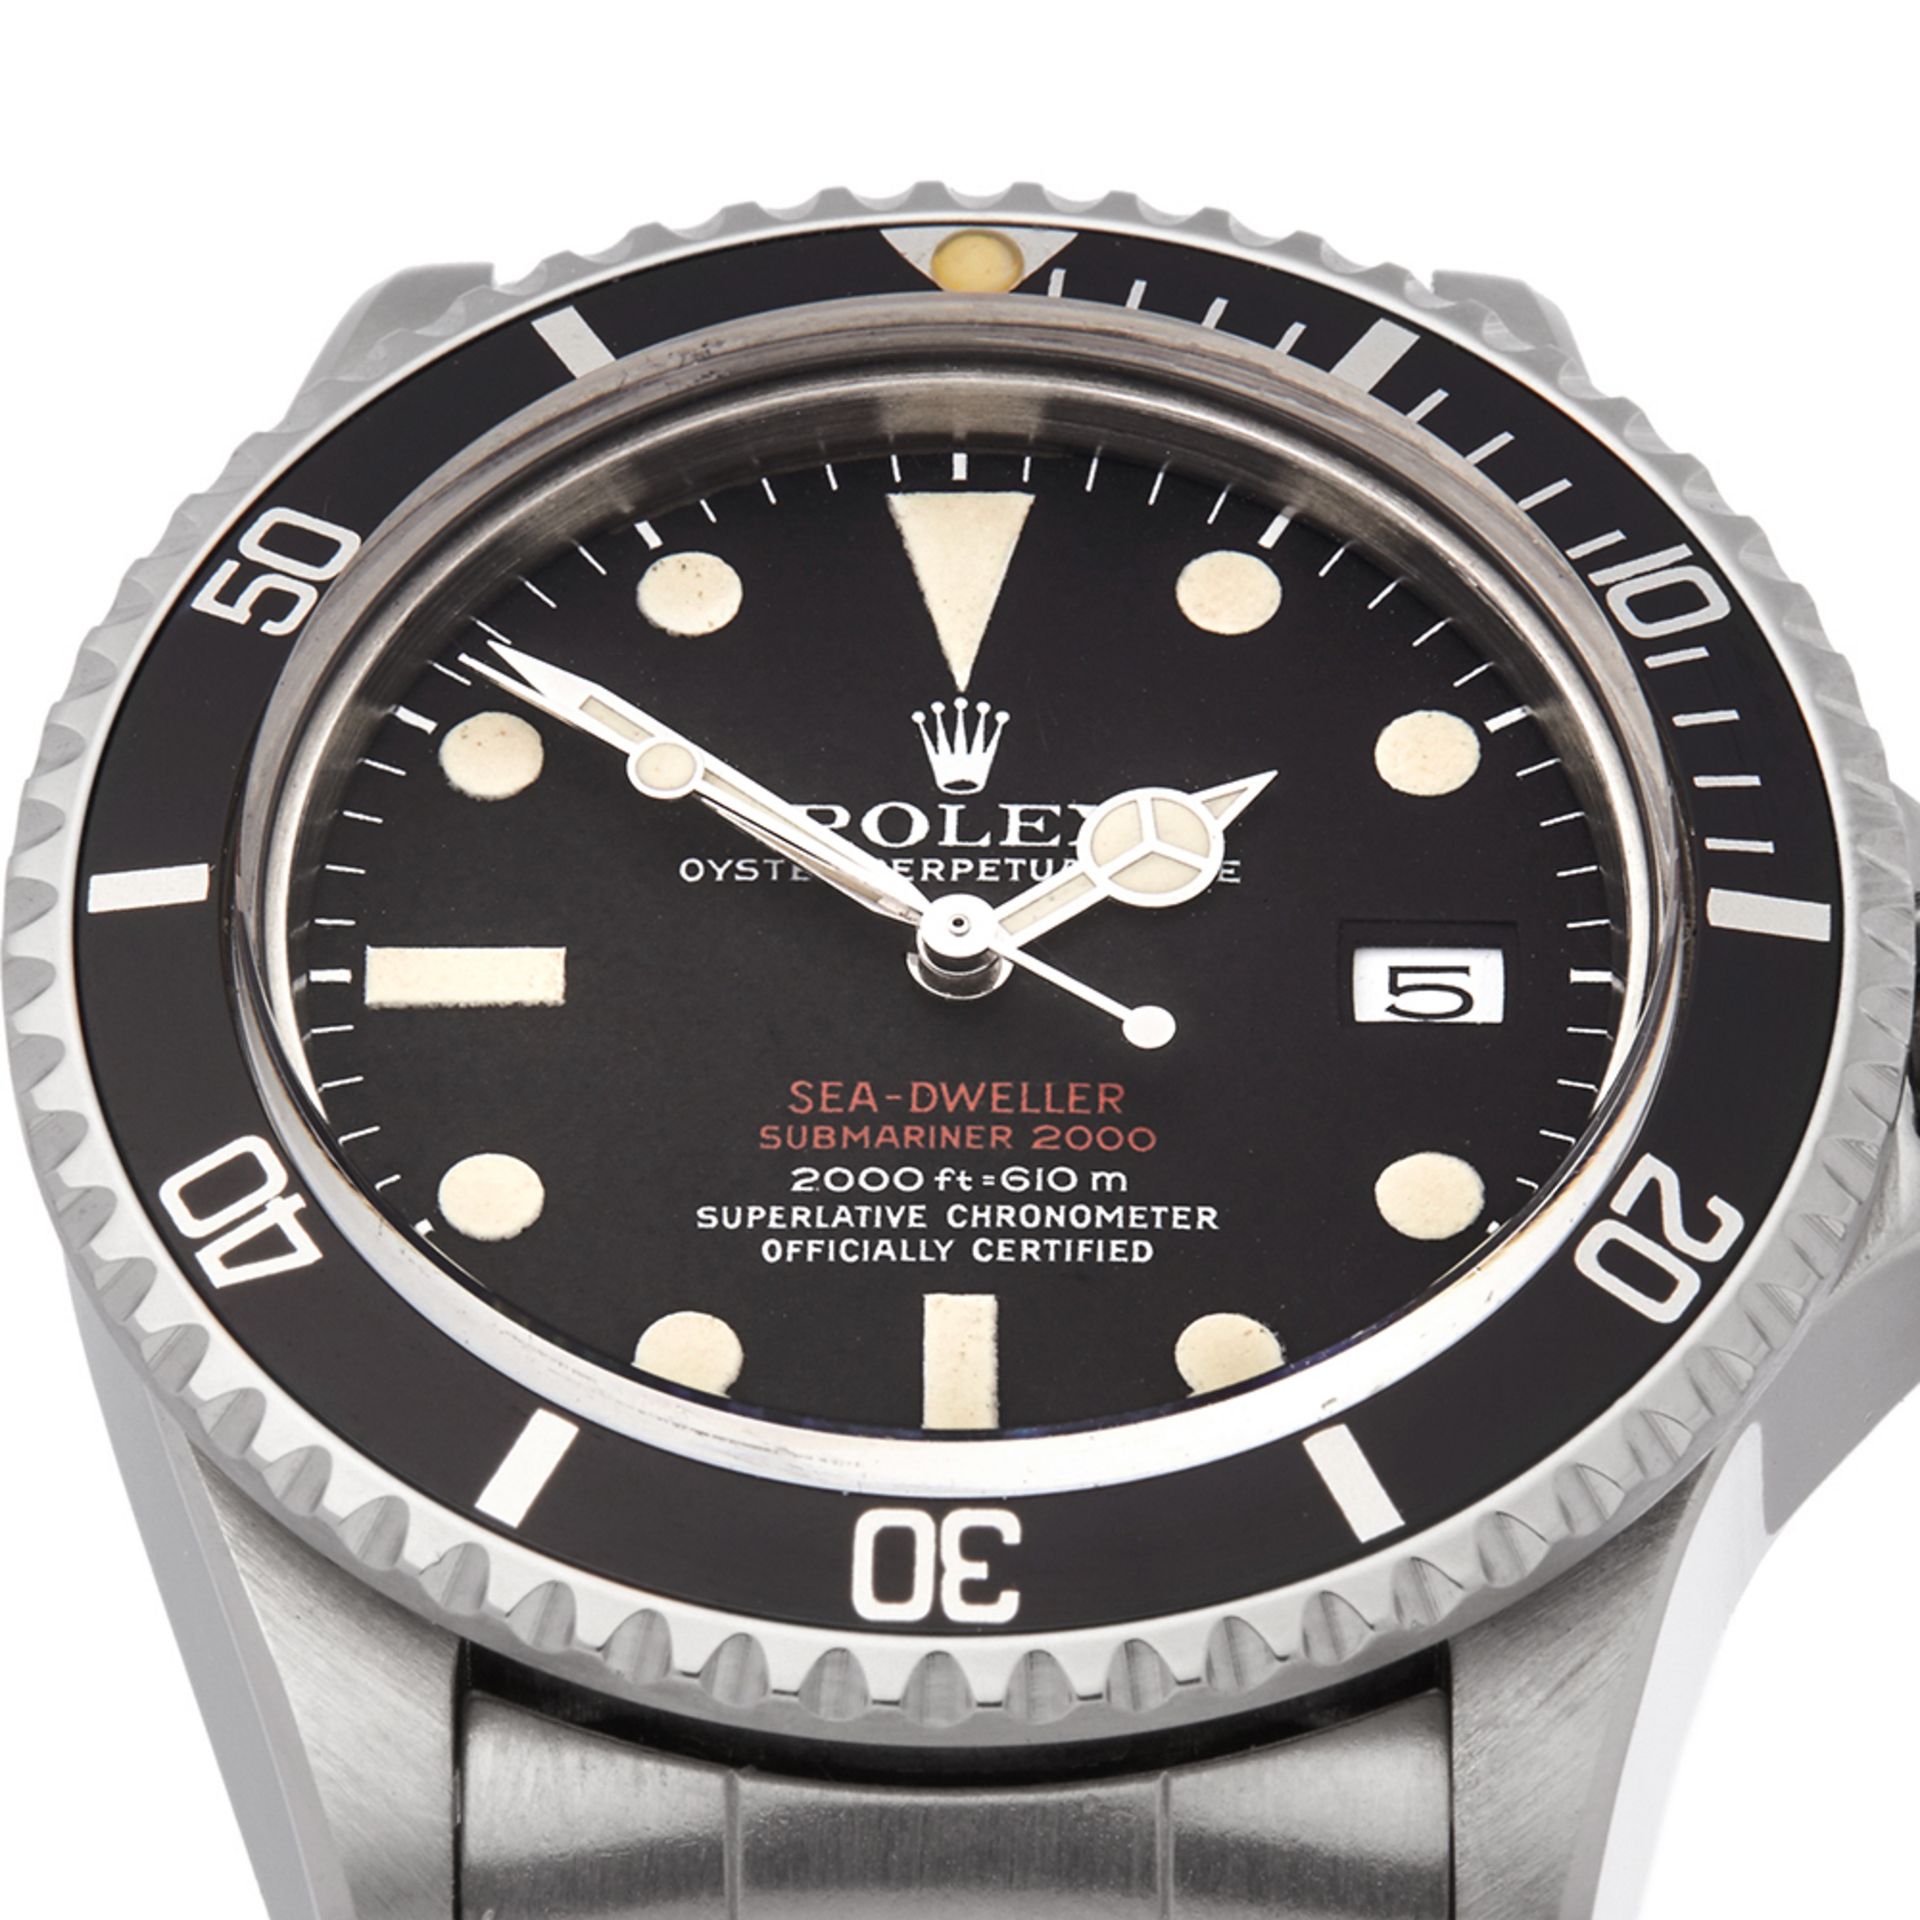 Rolex Sea-Dweller Double Red Drsd Stainless Steel - 1665 - Image 11 of 12